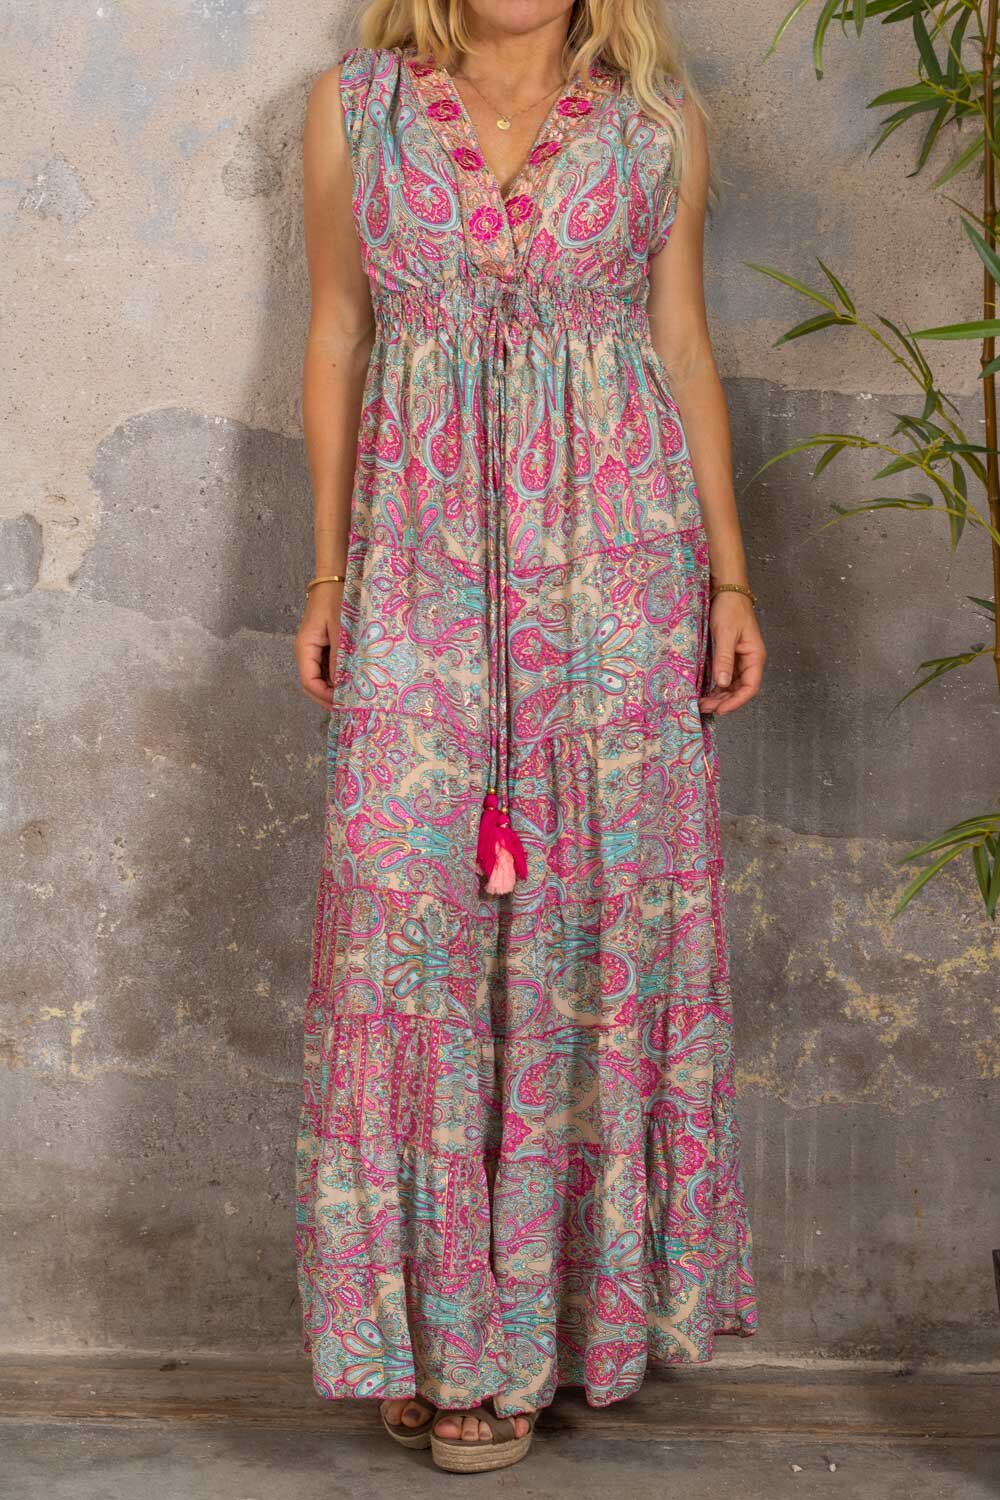 Evelyn Long Dress - Patterned & Embroidery Edge - Cerise/Blue